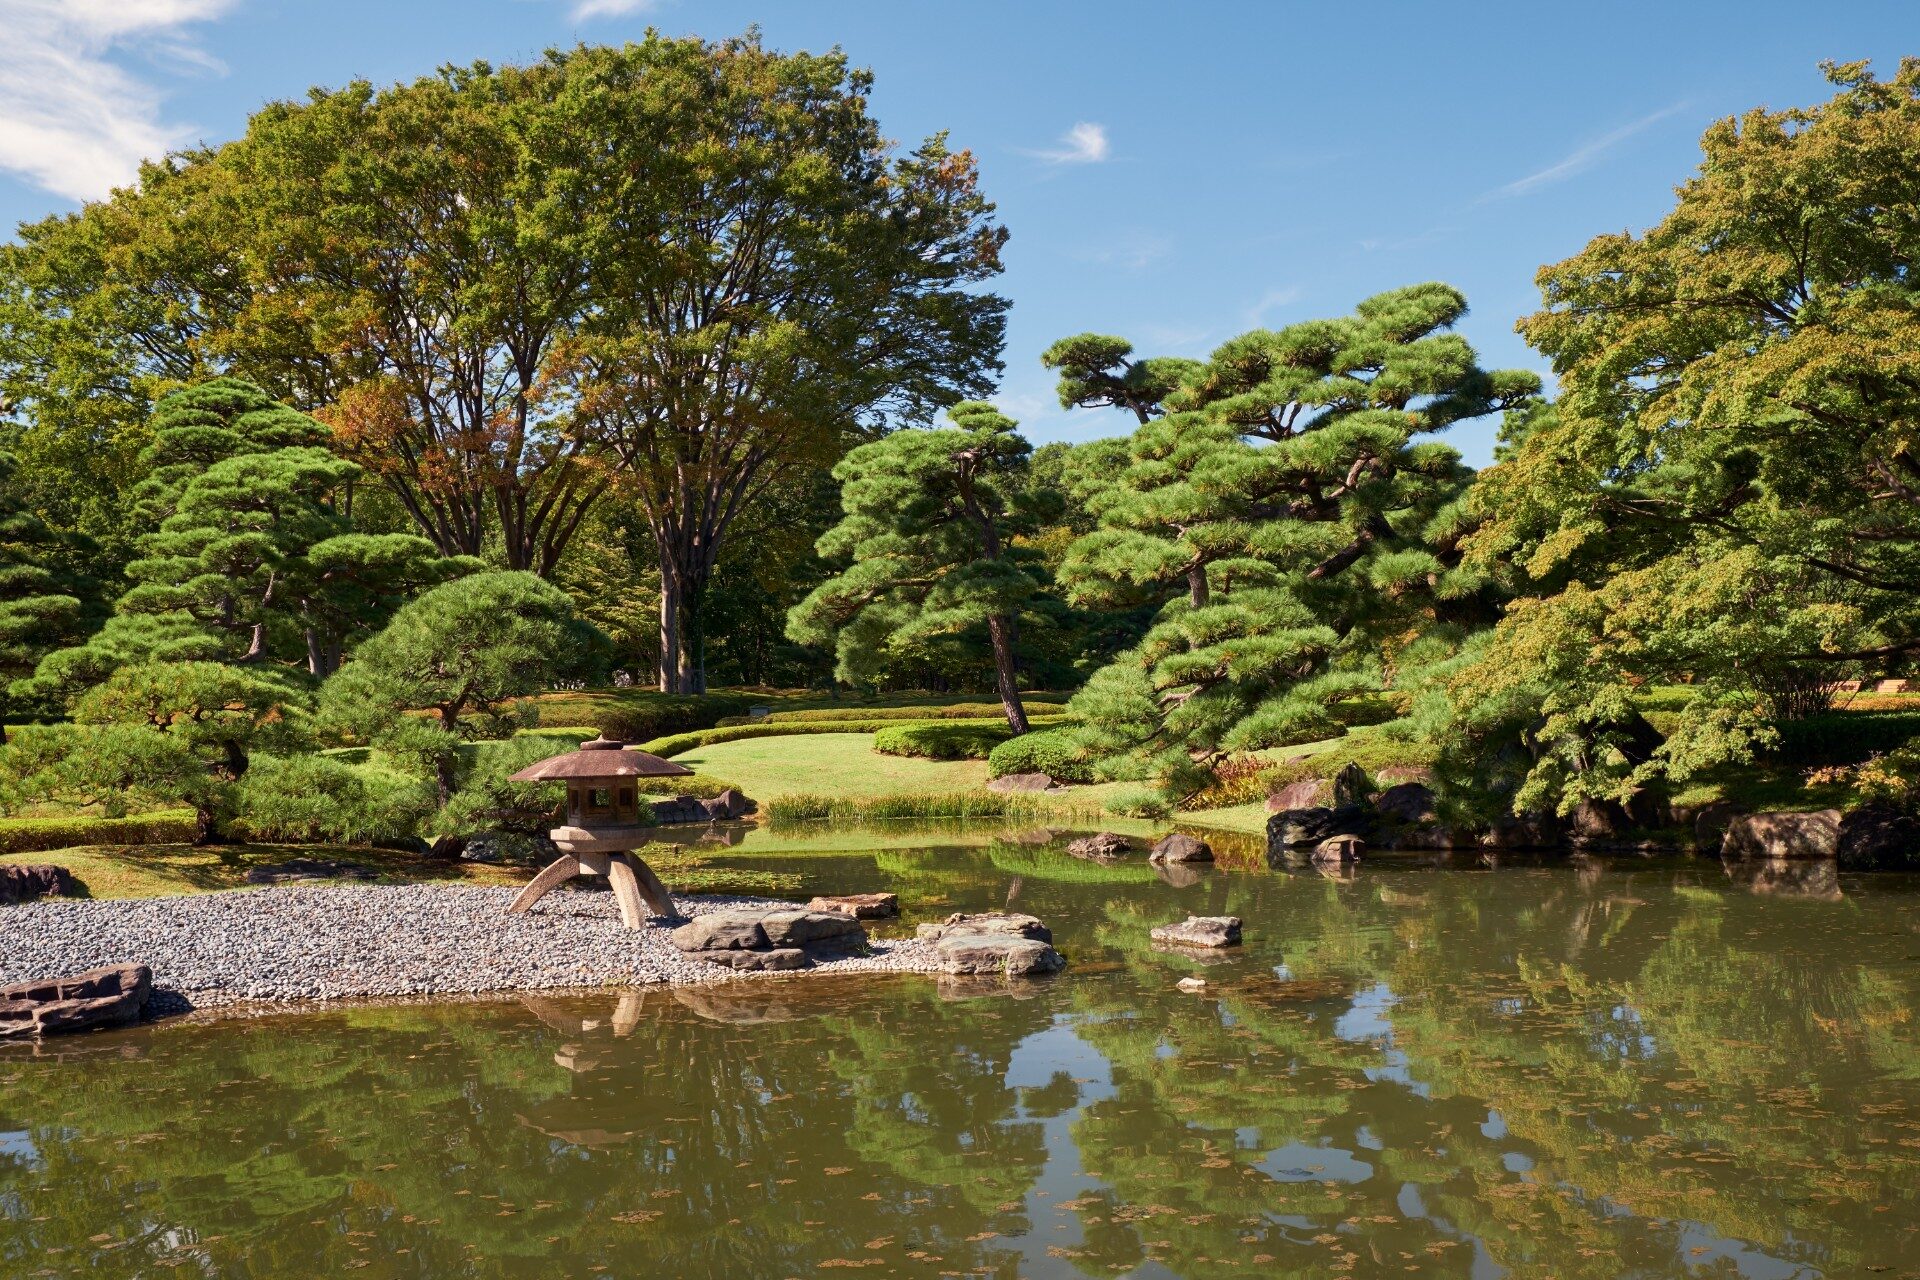 This koi pond modelled after the islands belonging to a national